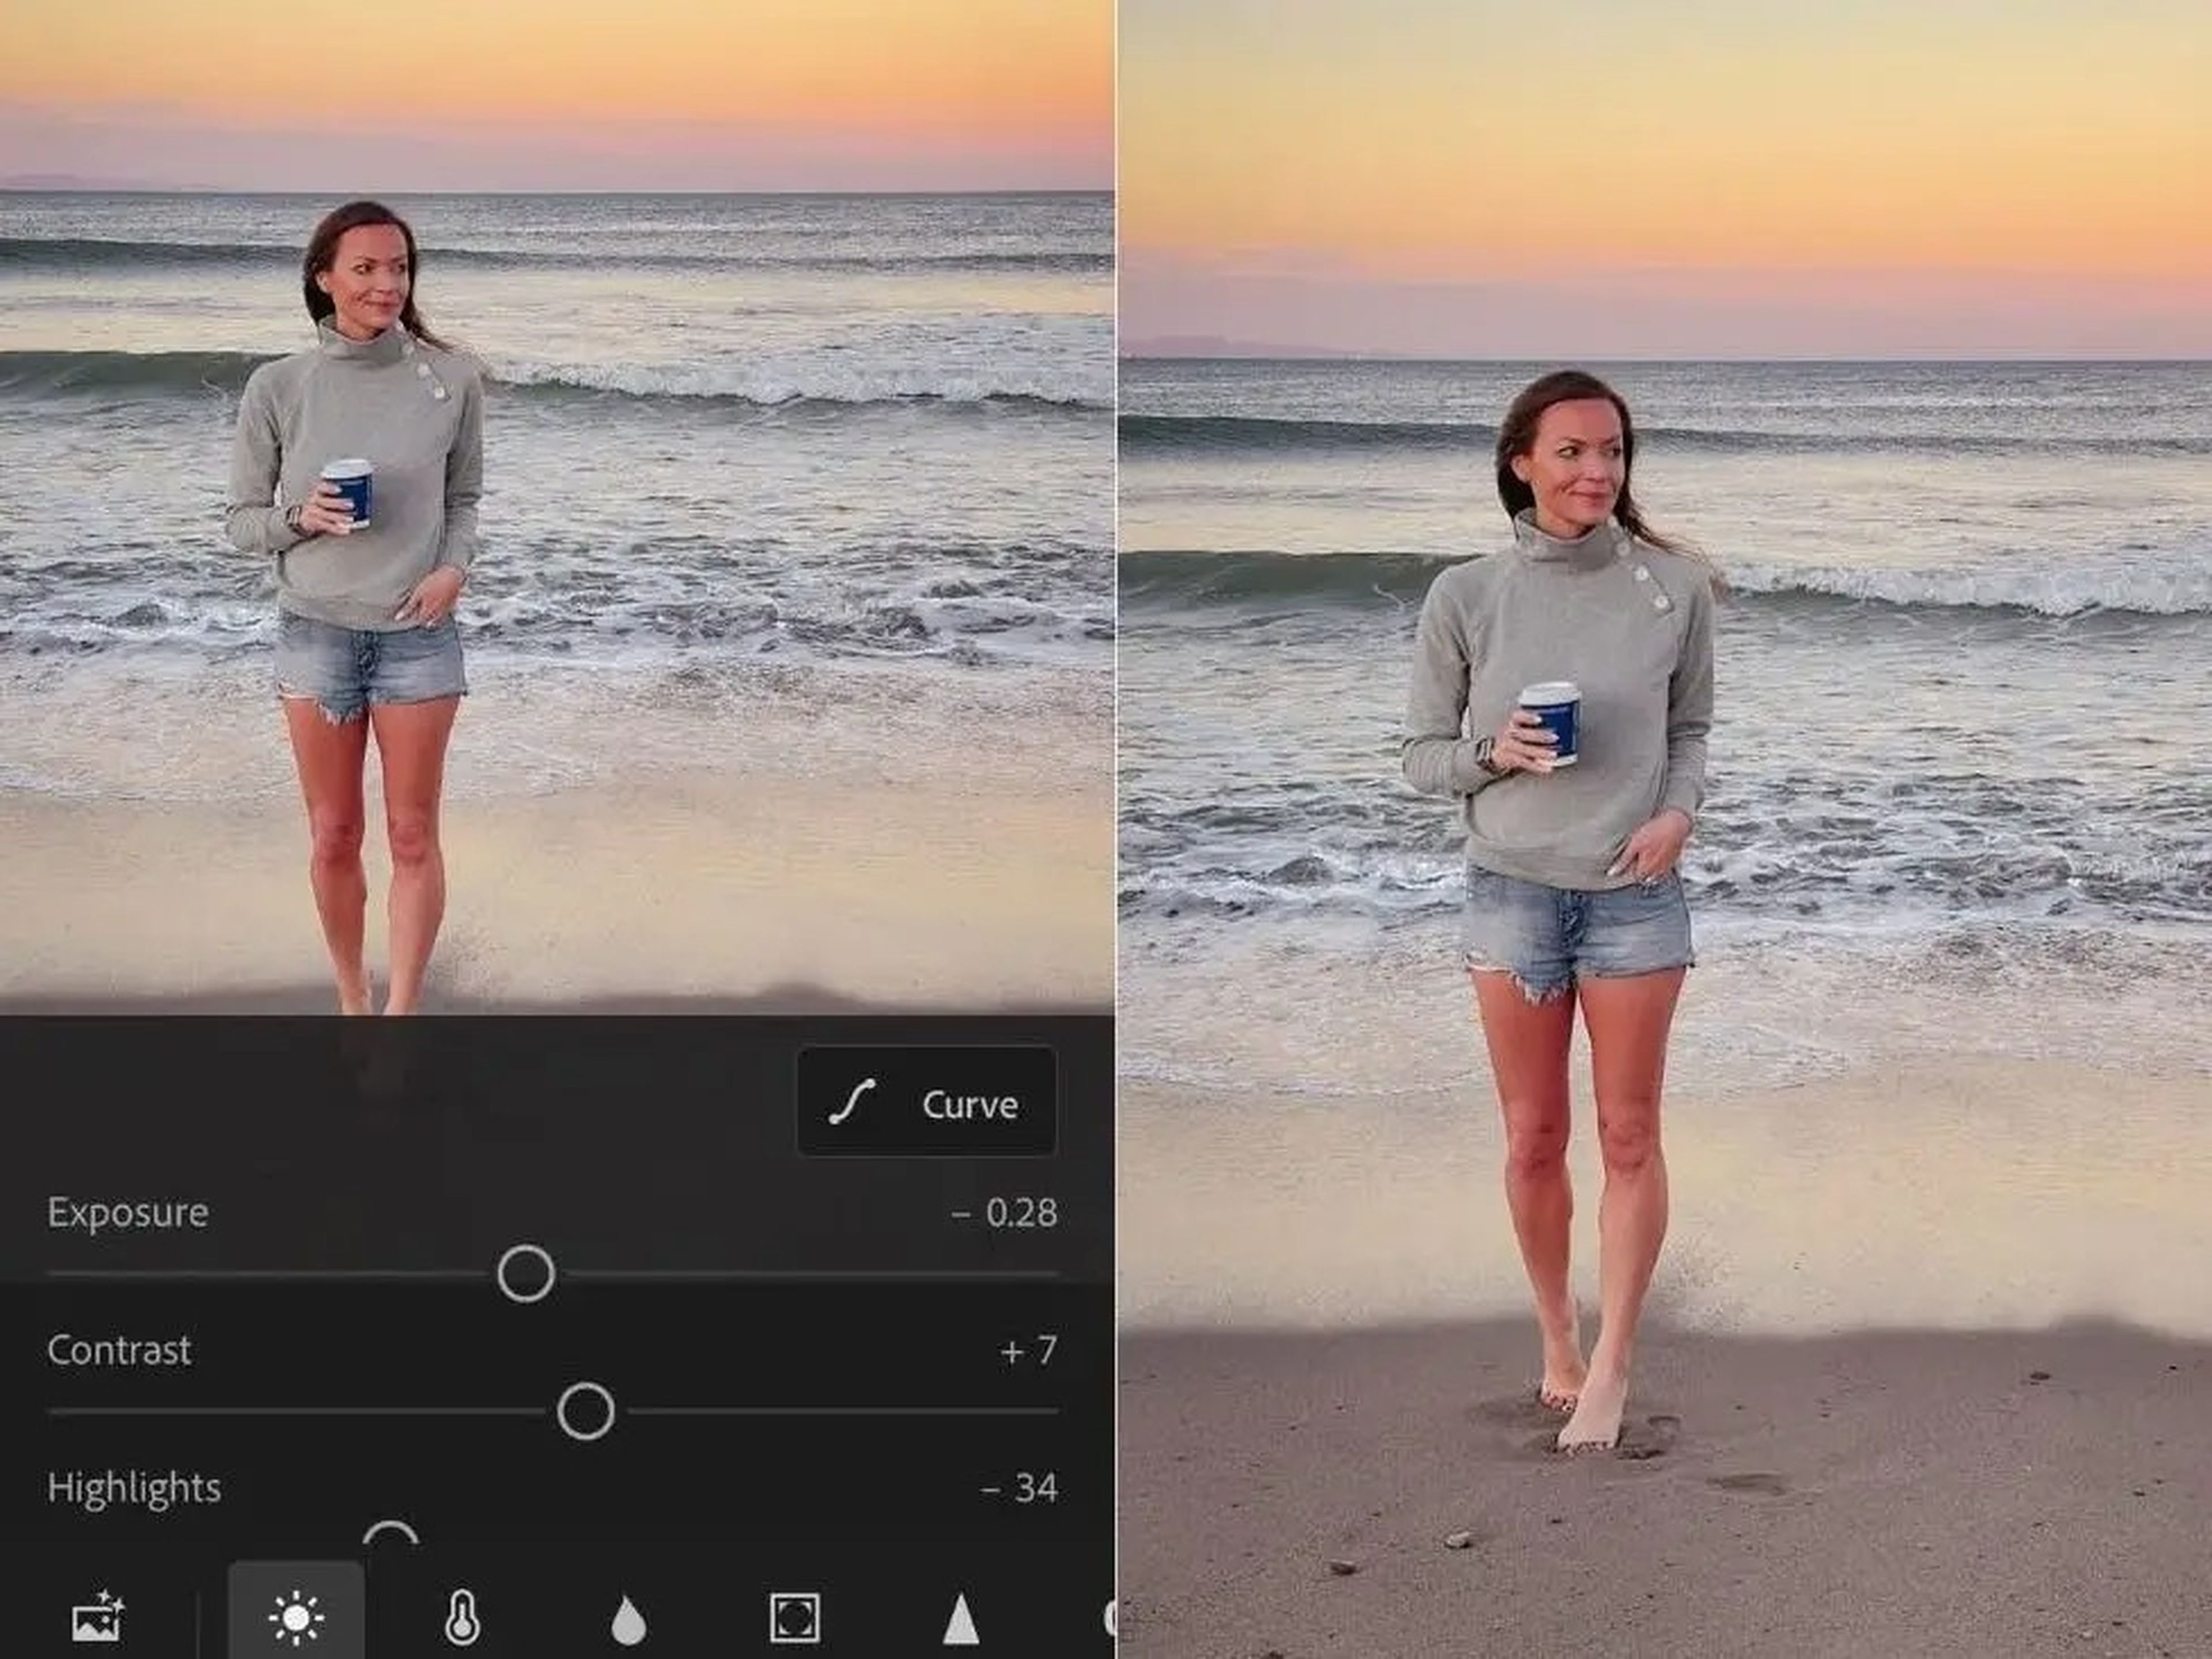 On the left, a photo of Emily standing on the beach at sunset, with Lightroom controls at the bottom. On the right, the same photo of Emily edited.